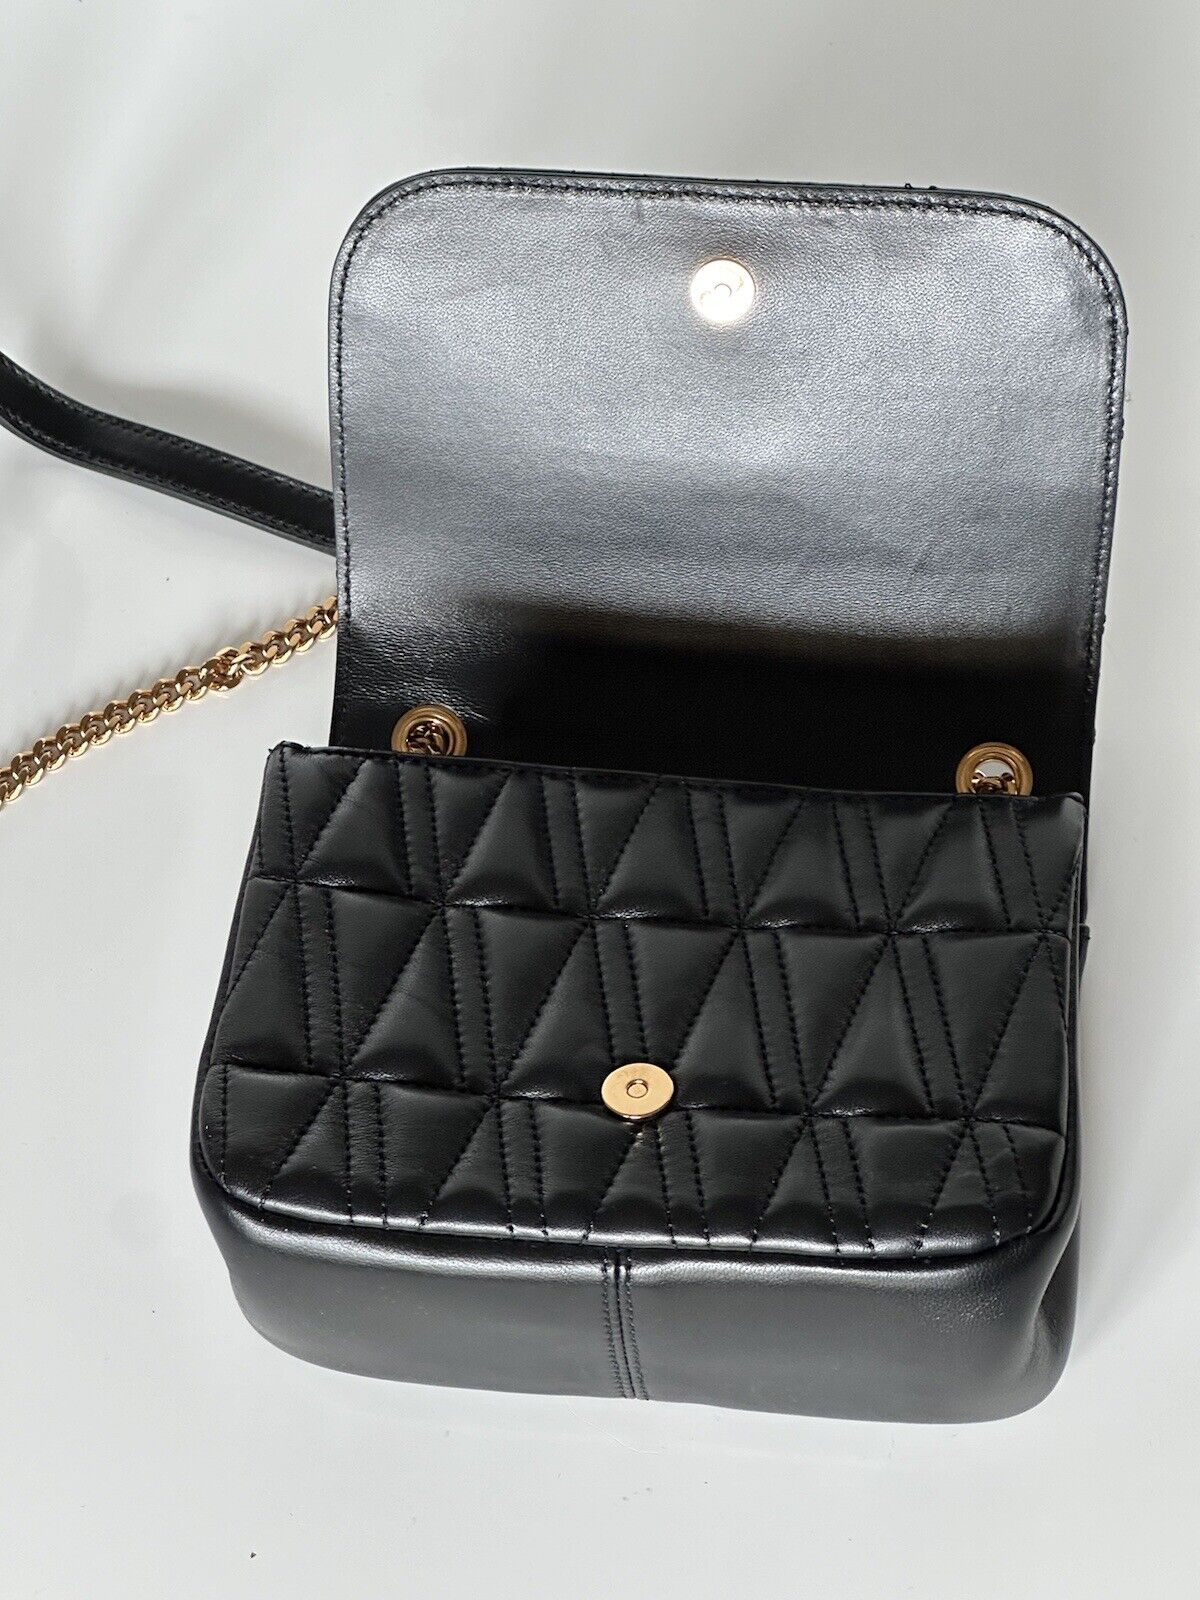 Versace Virtus Quilted Leather Black Crossbody Shoulder Bag DBFH821 NWT $1925 IT